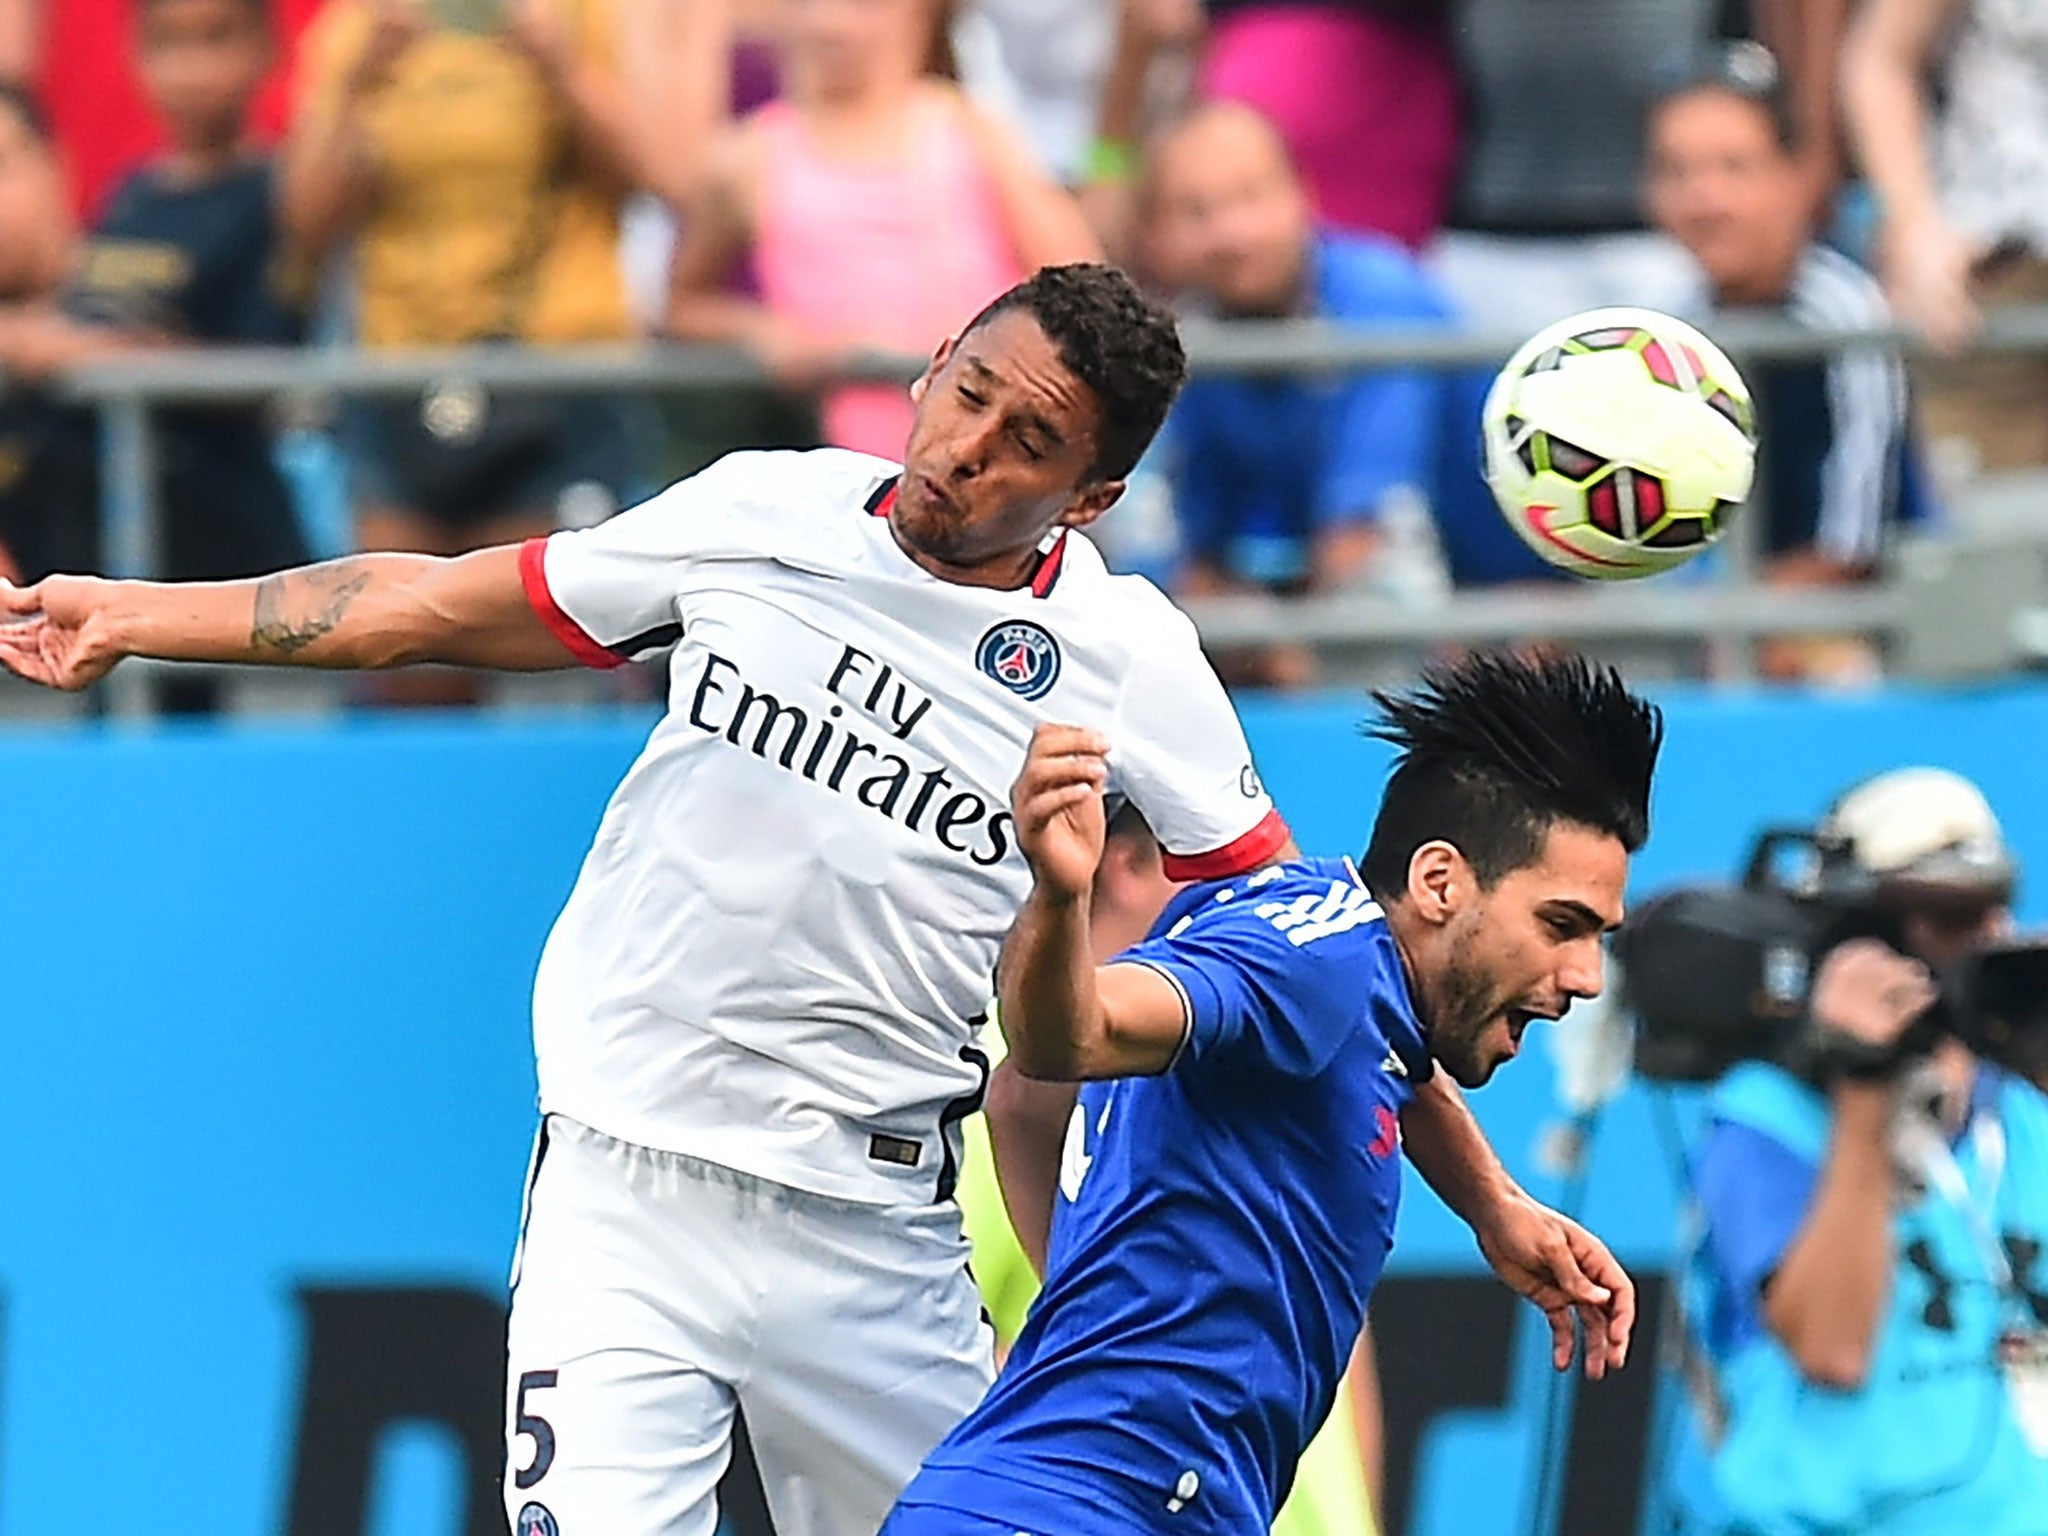 Radamel Falcao (right) challenges for the ball on his Chelsea debut last week